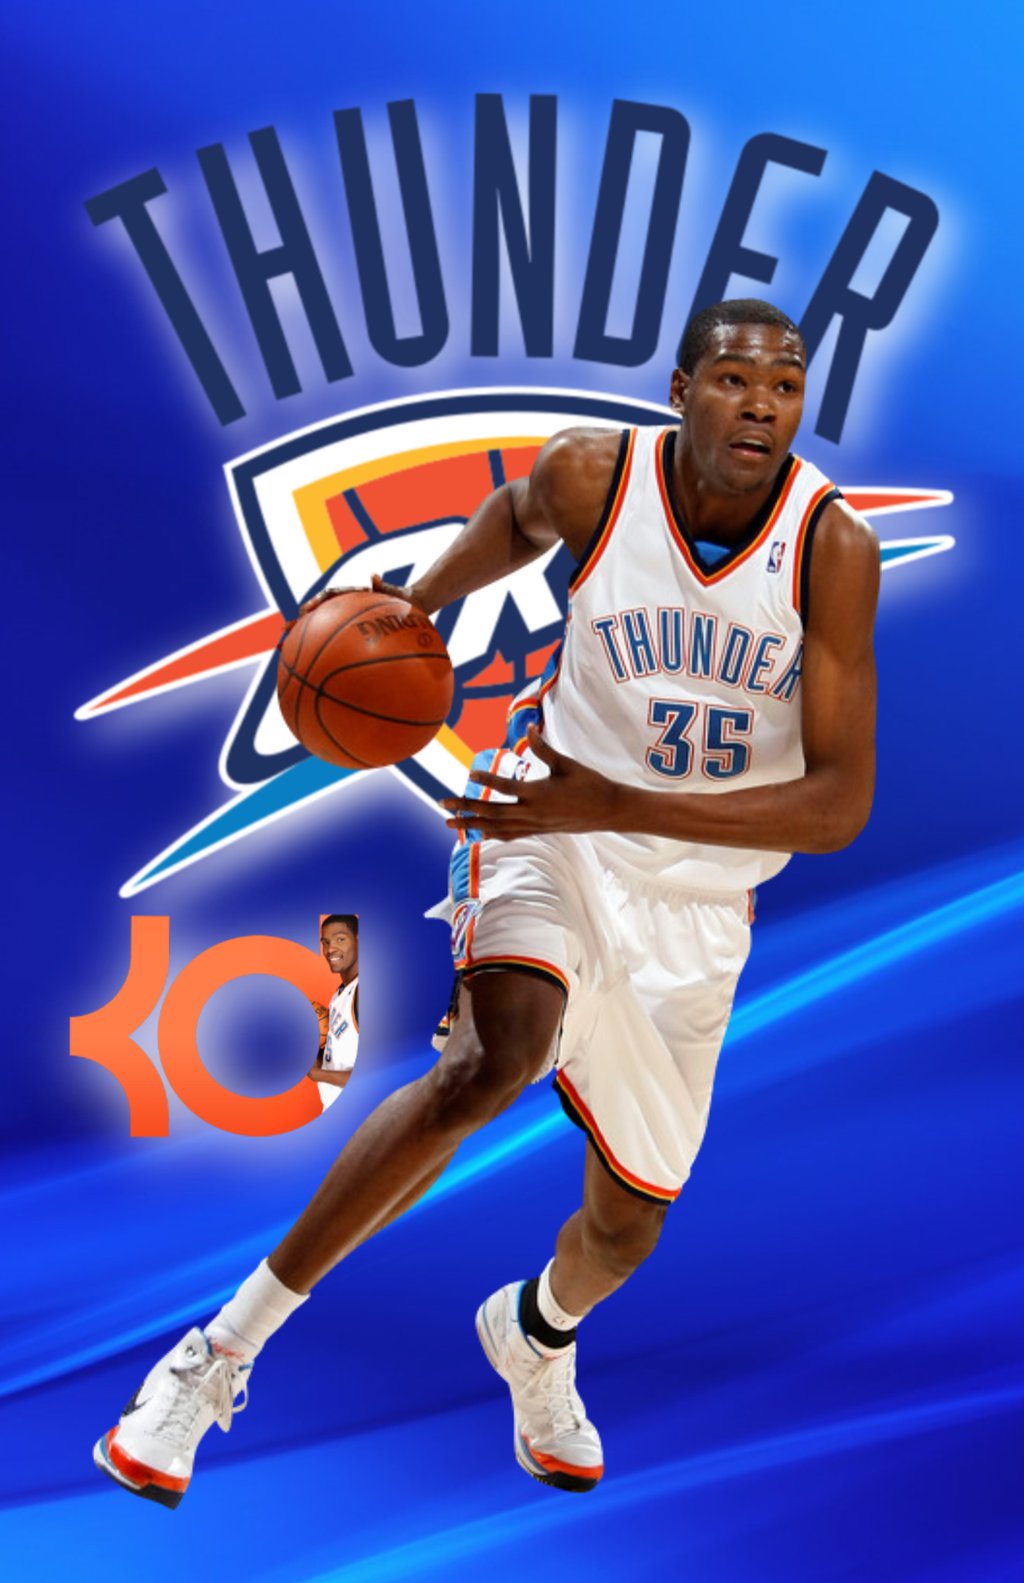 iPhone Wallpaper Kevin Durant